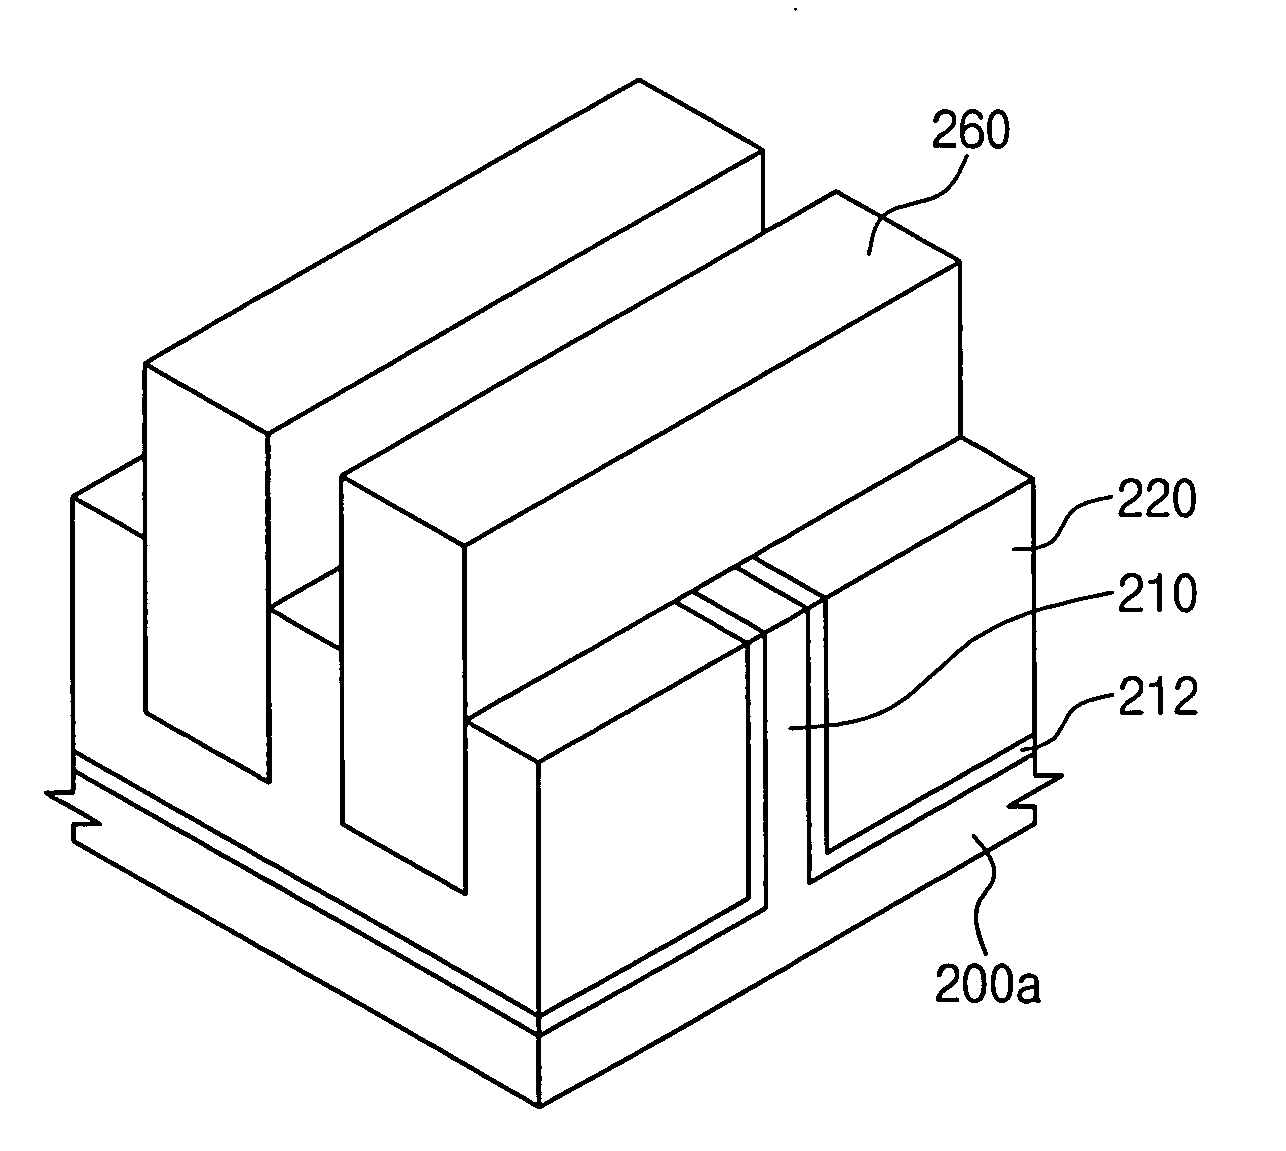 FinFET and method of manufacturing the same